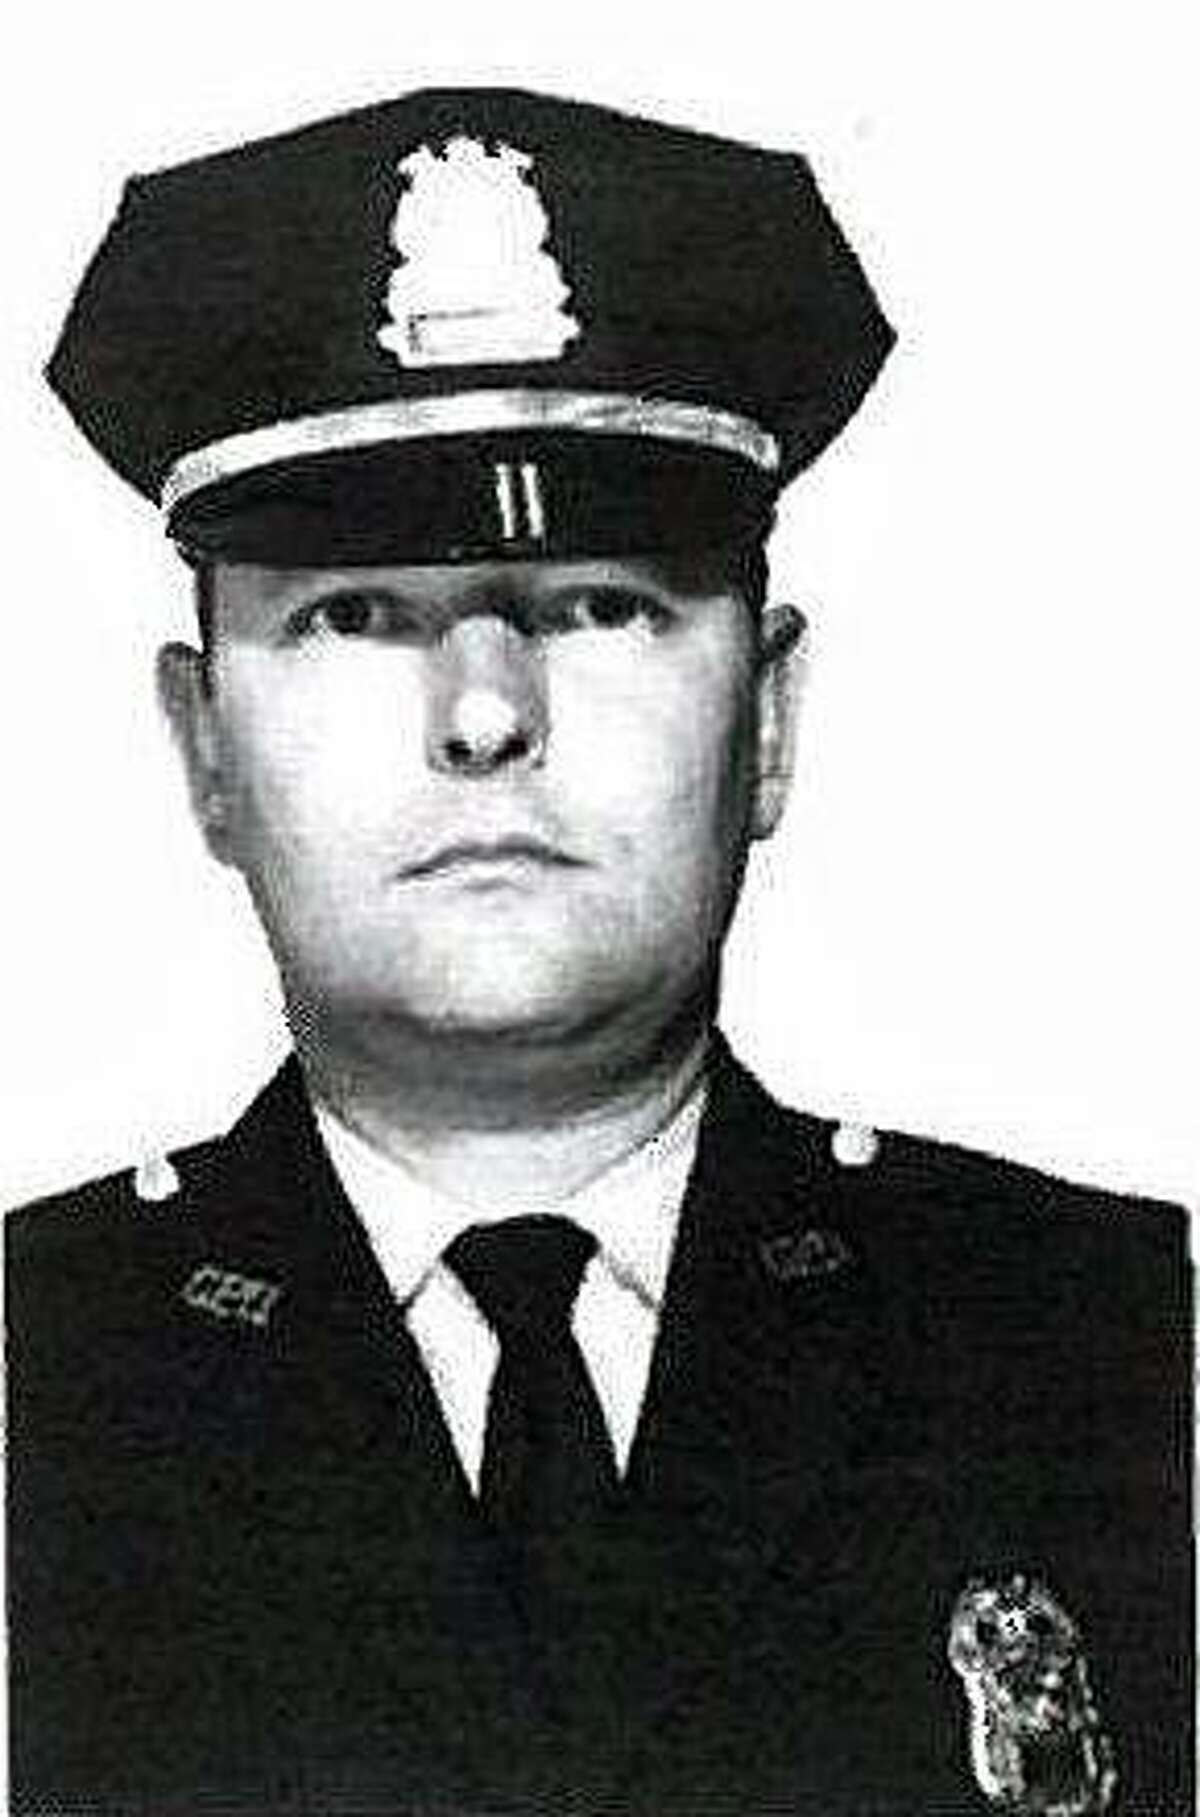 Retired Greenwich Police Capt. Albert Barclay died on May 13, 2019, at the age of 83.